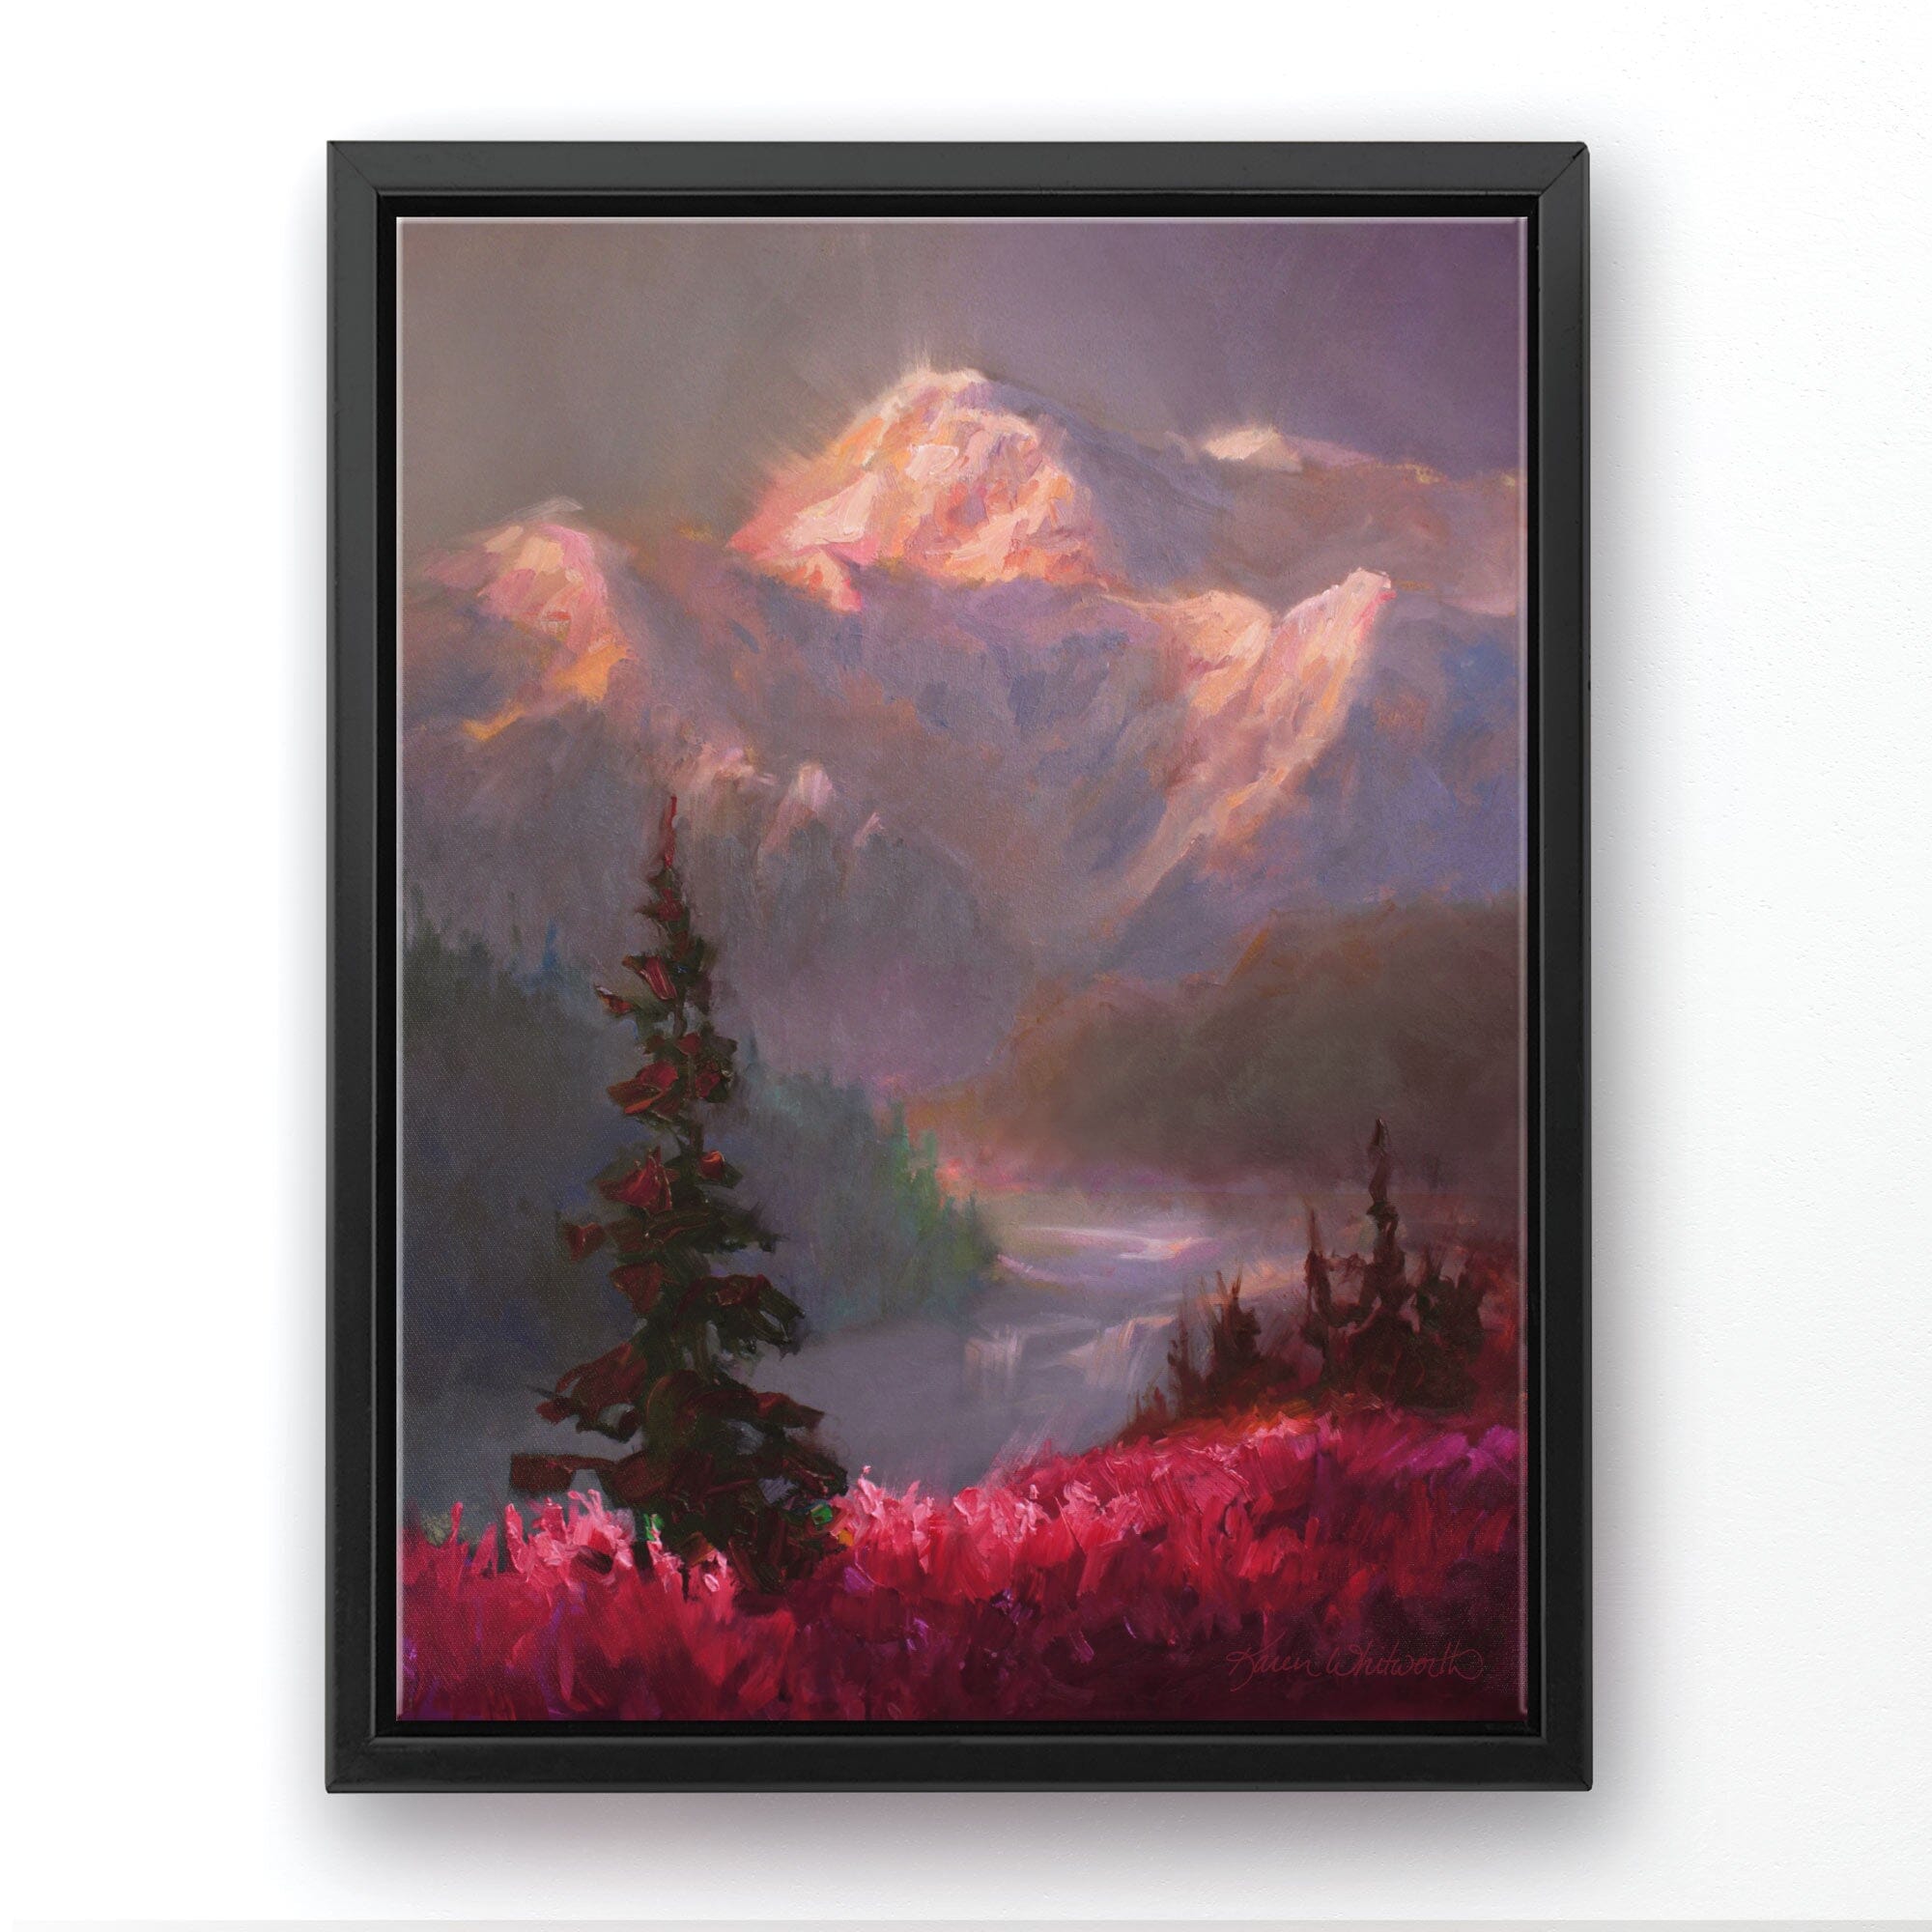 Alaska canvas art of mountain landscape painting depicting Denali in the background and trees and fireweed flowers in the foreground. The wall art is framed in a black floater frame and hanging on a white wall. 